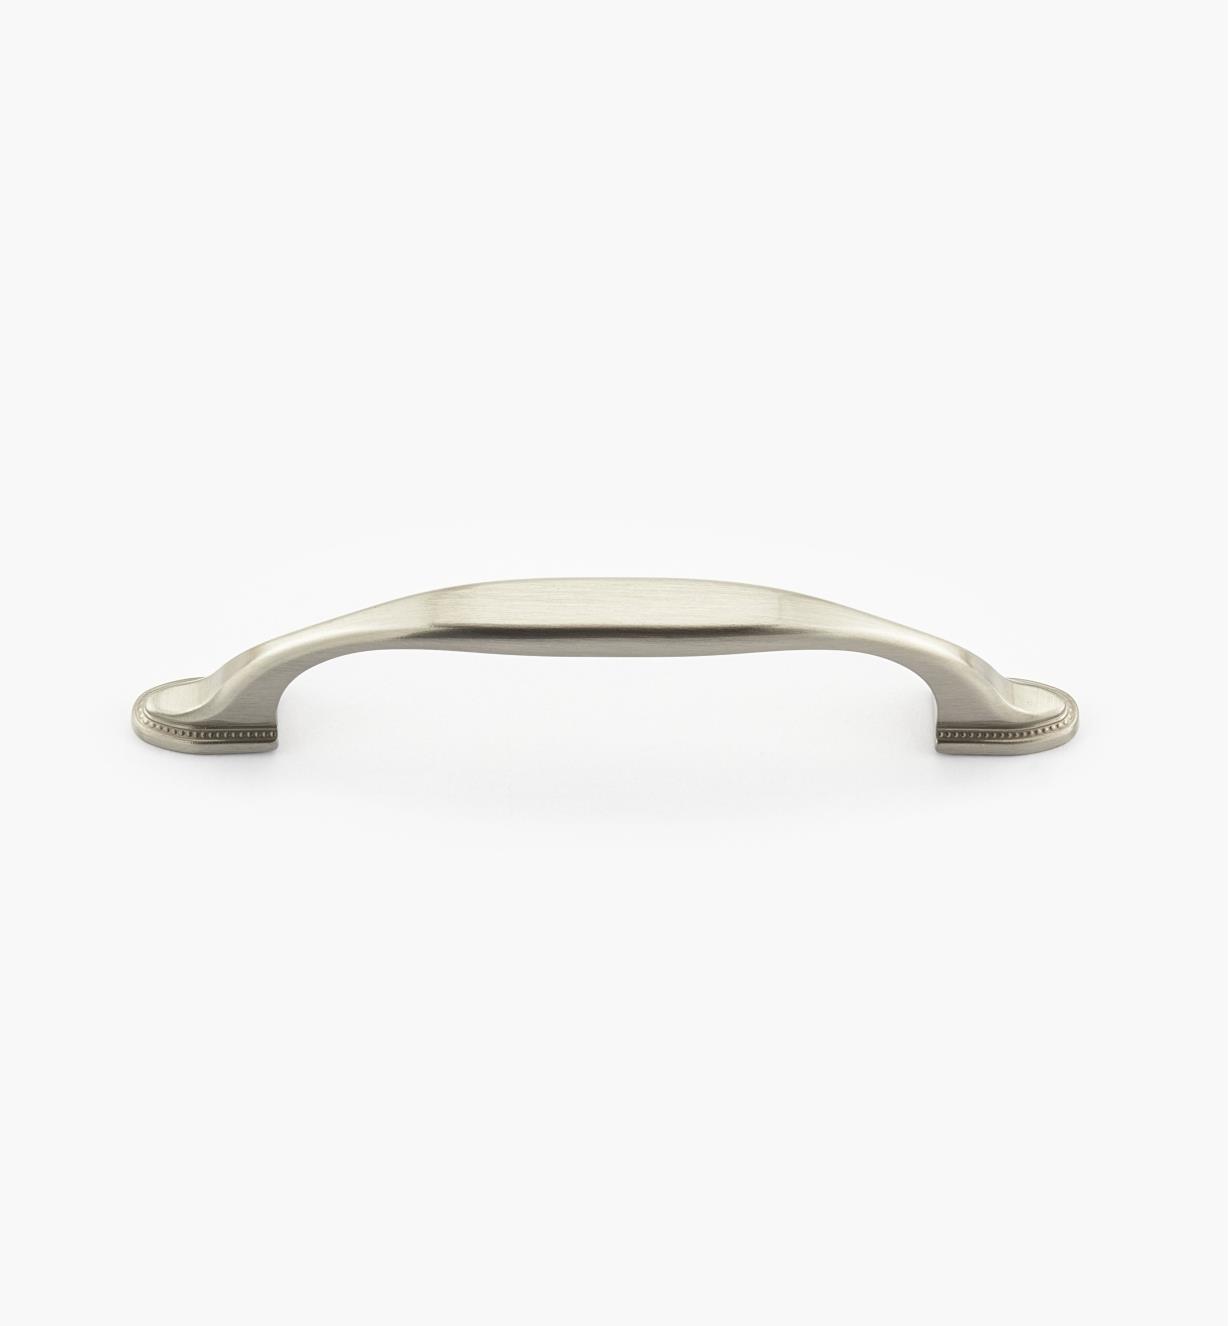 02A1583 - Atherly Hardware –Satin Nickel Handle, 96mm